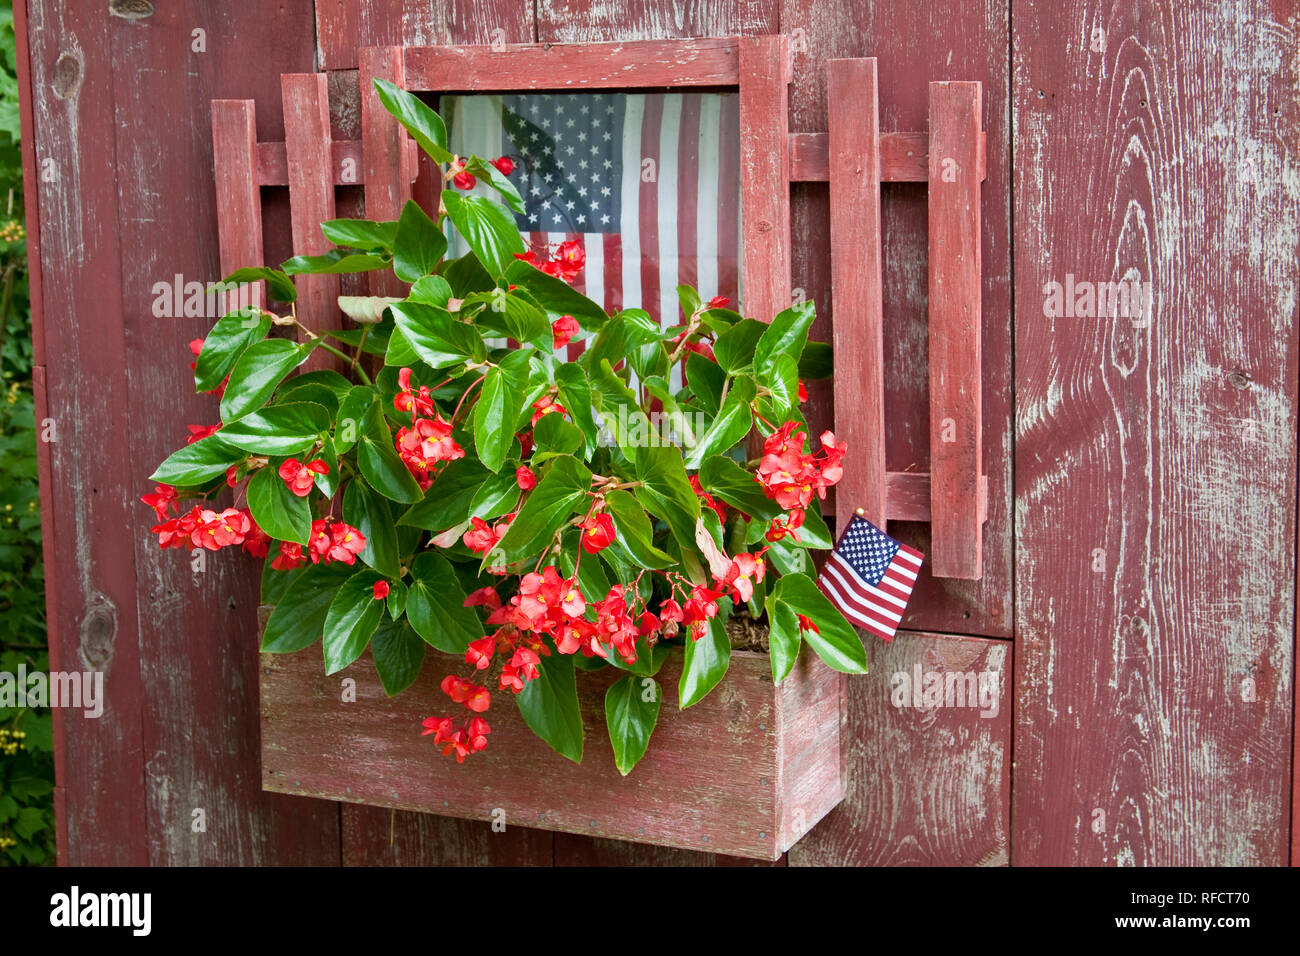 63821-22019 Window Box planter with Red Dragon Wing Begonias (Begonia x hybrida) and American flags on old red shed,  Marion Co., IL Stock Photo